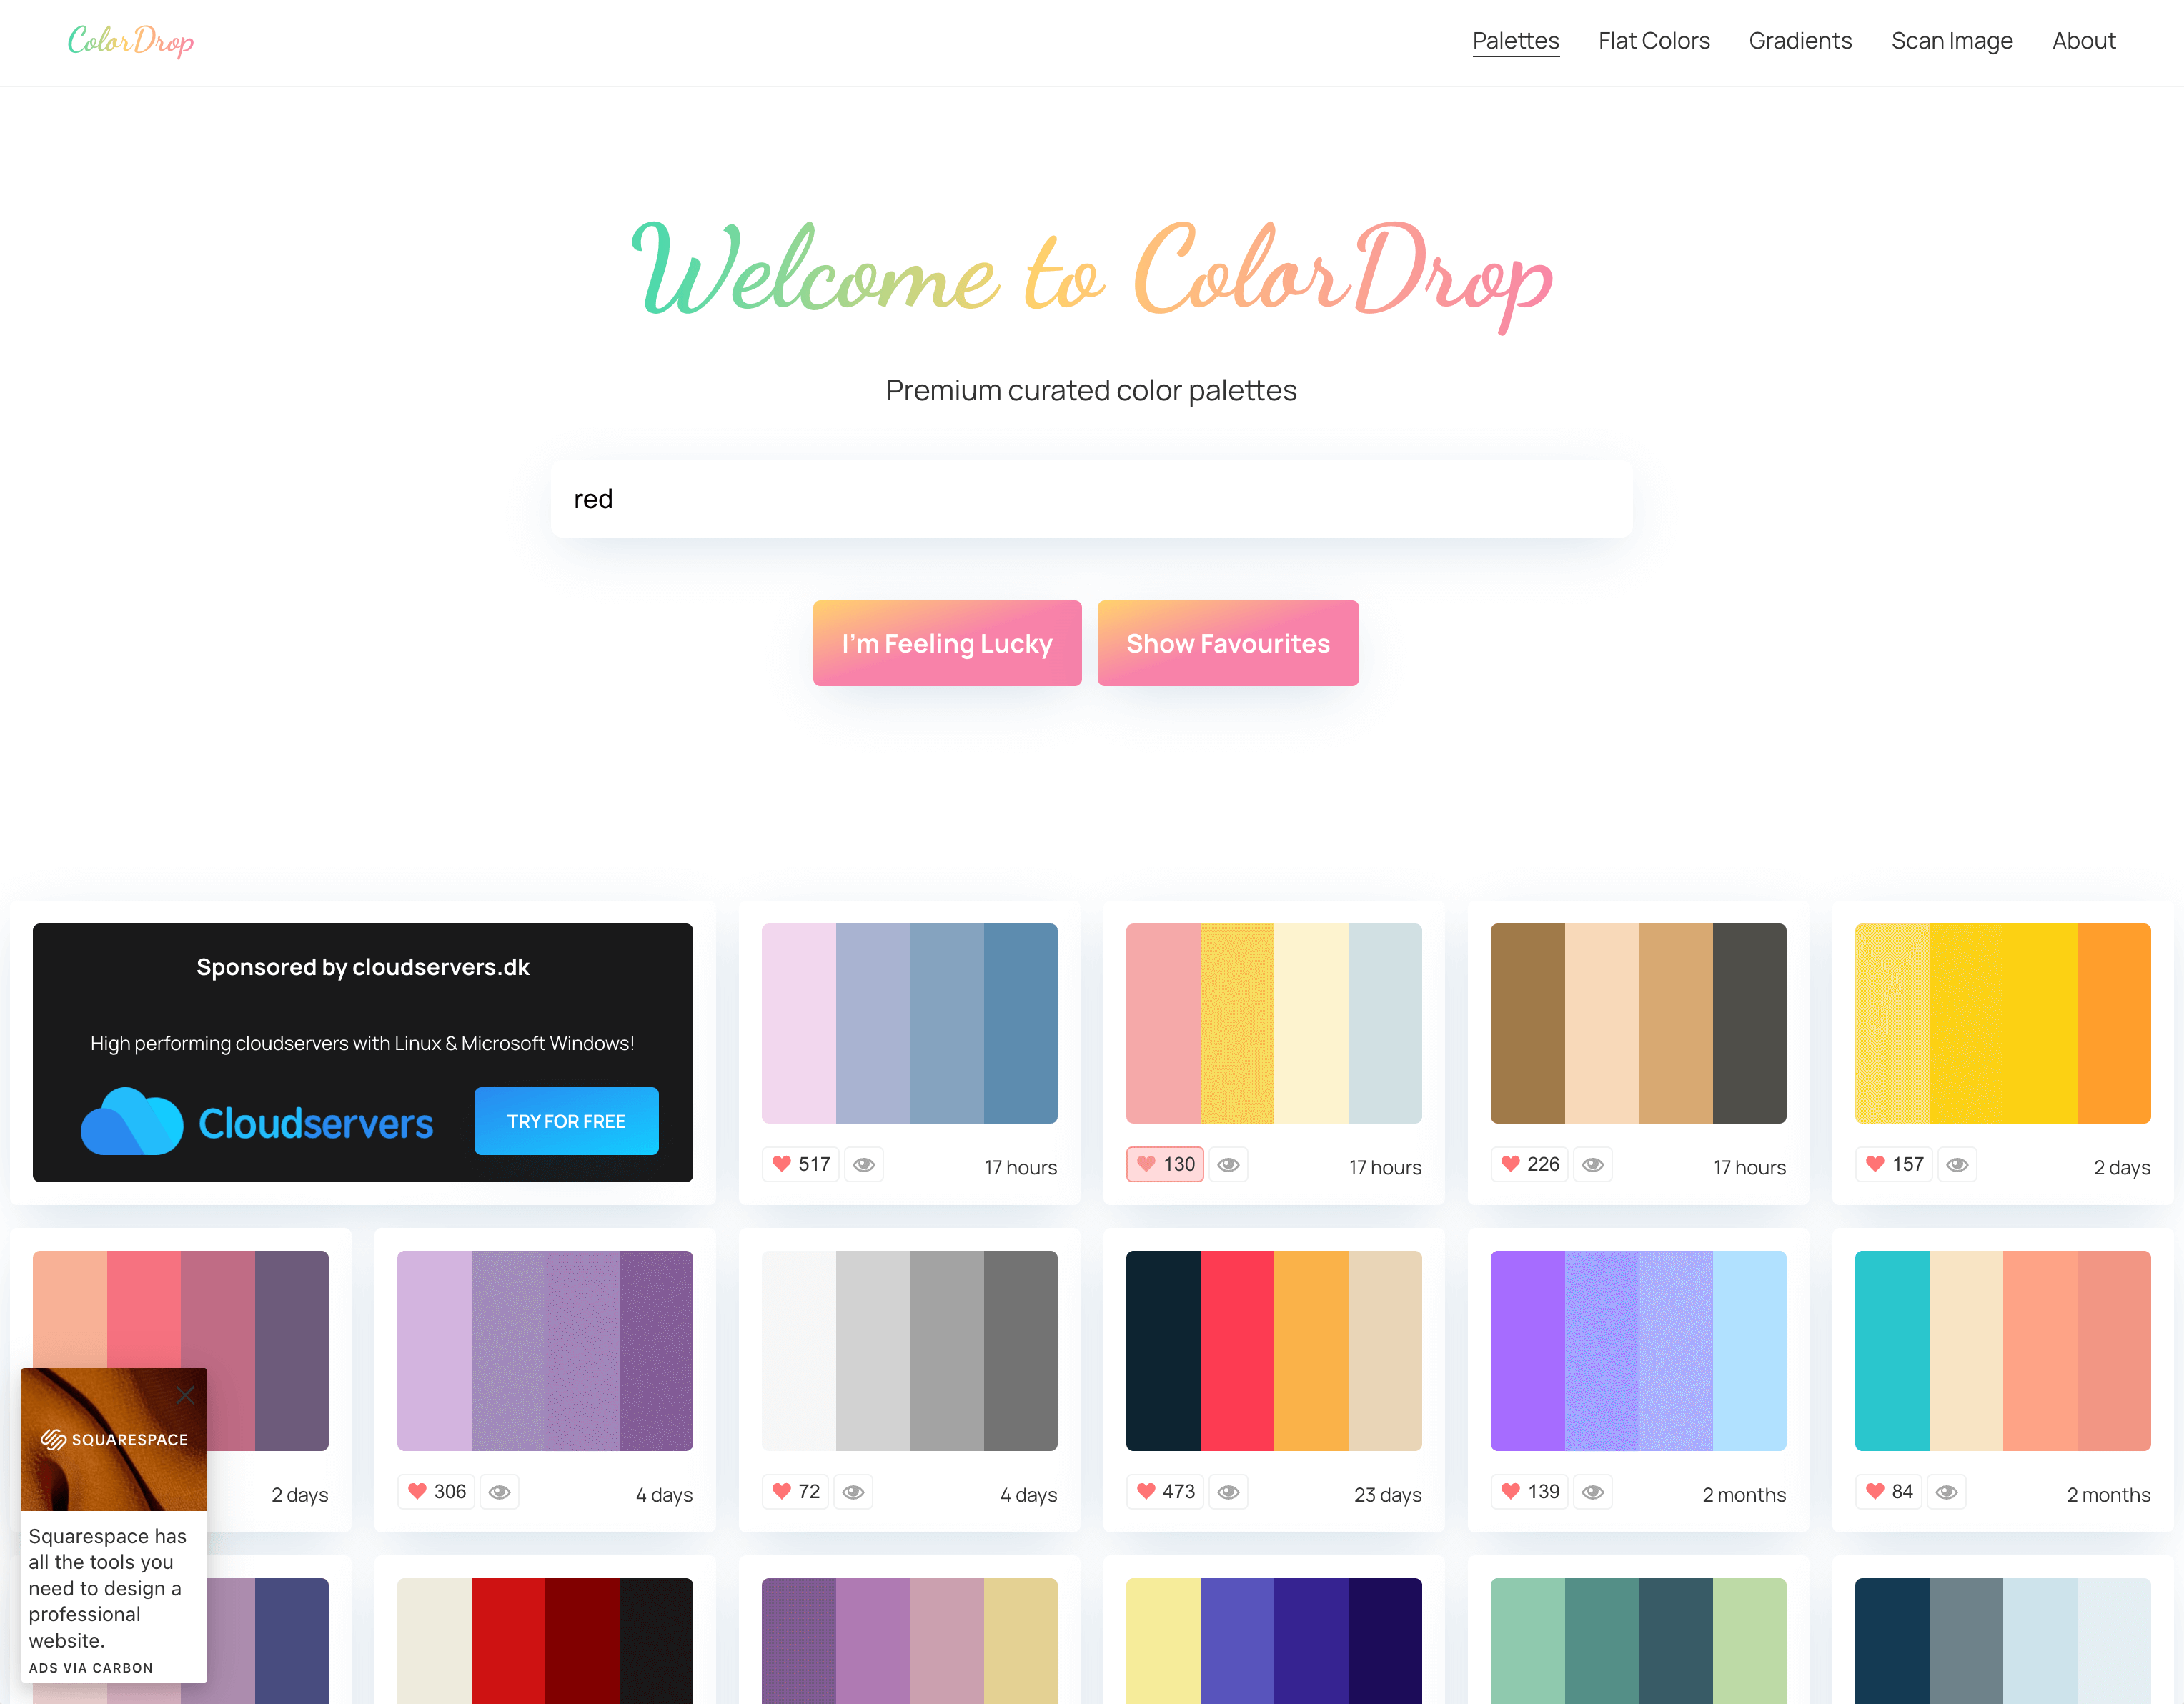 Image of the ColorDrop website